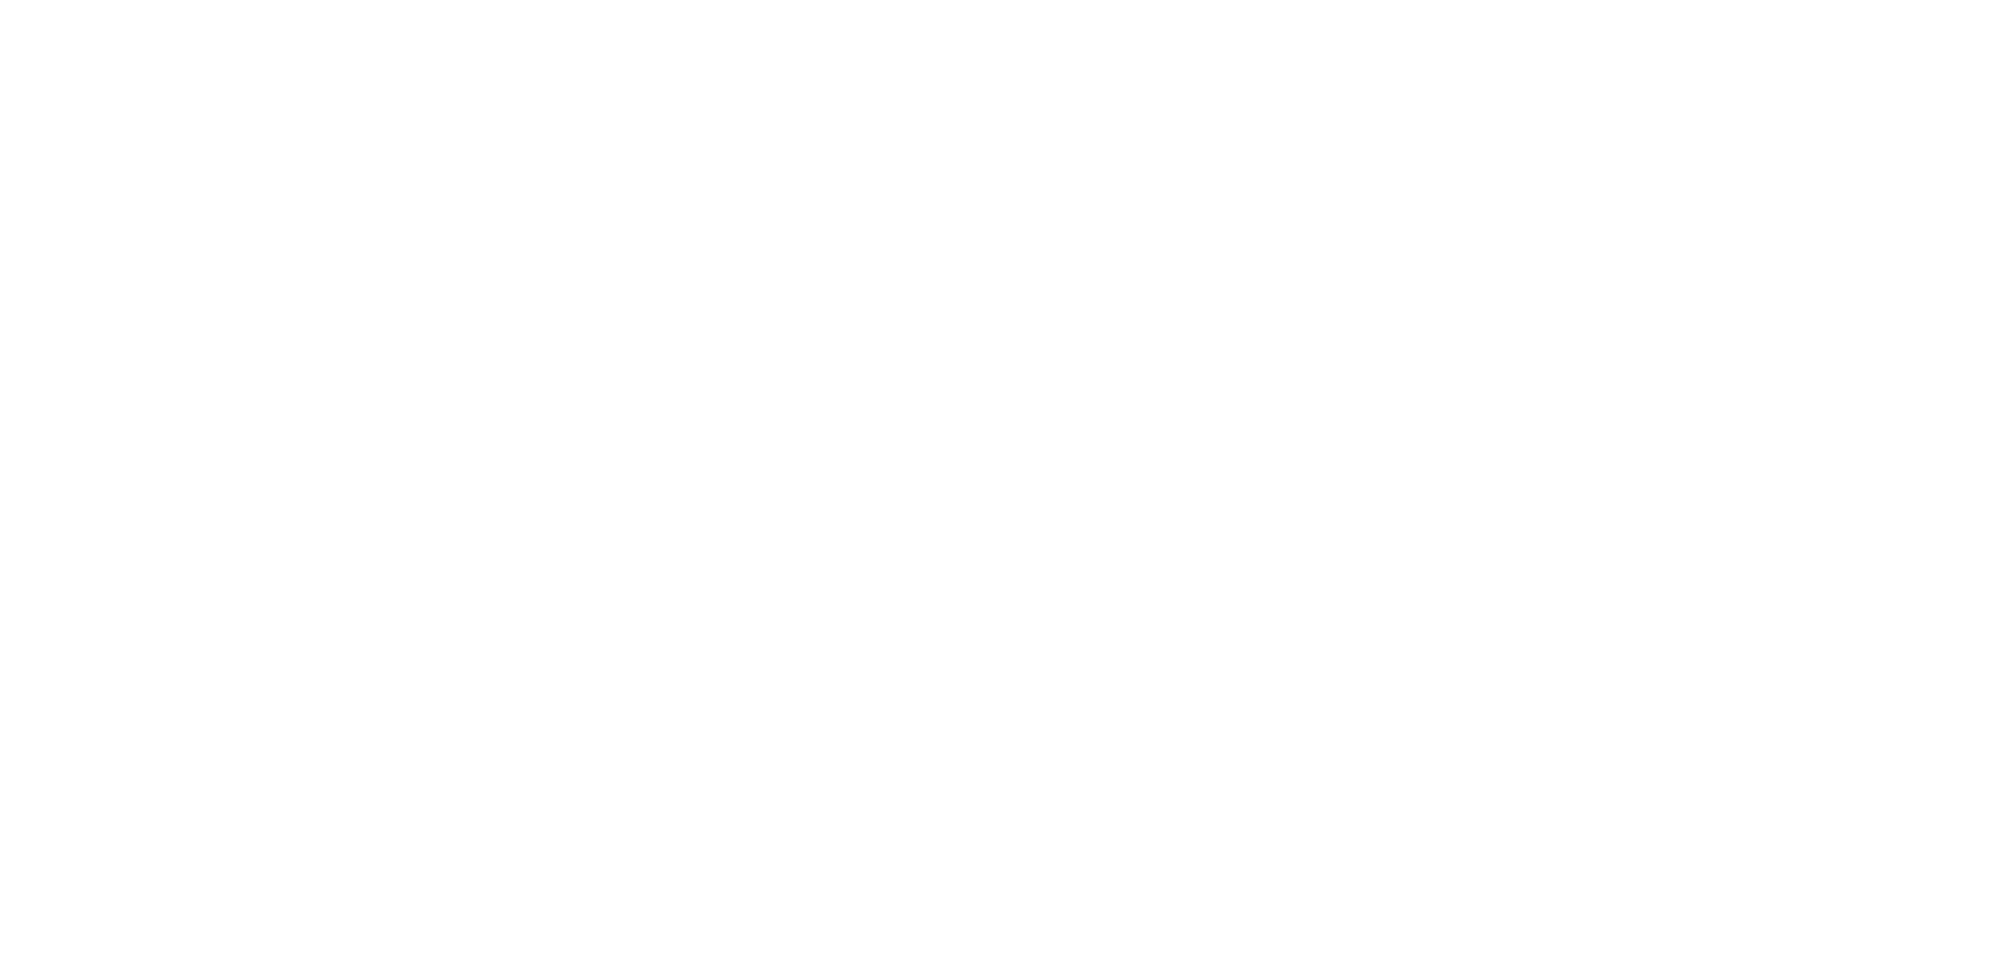 Nevada Department of Education